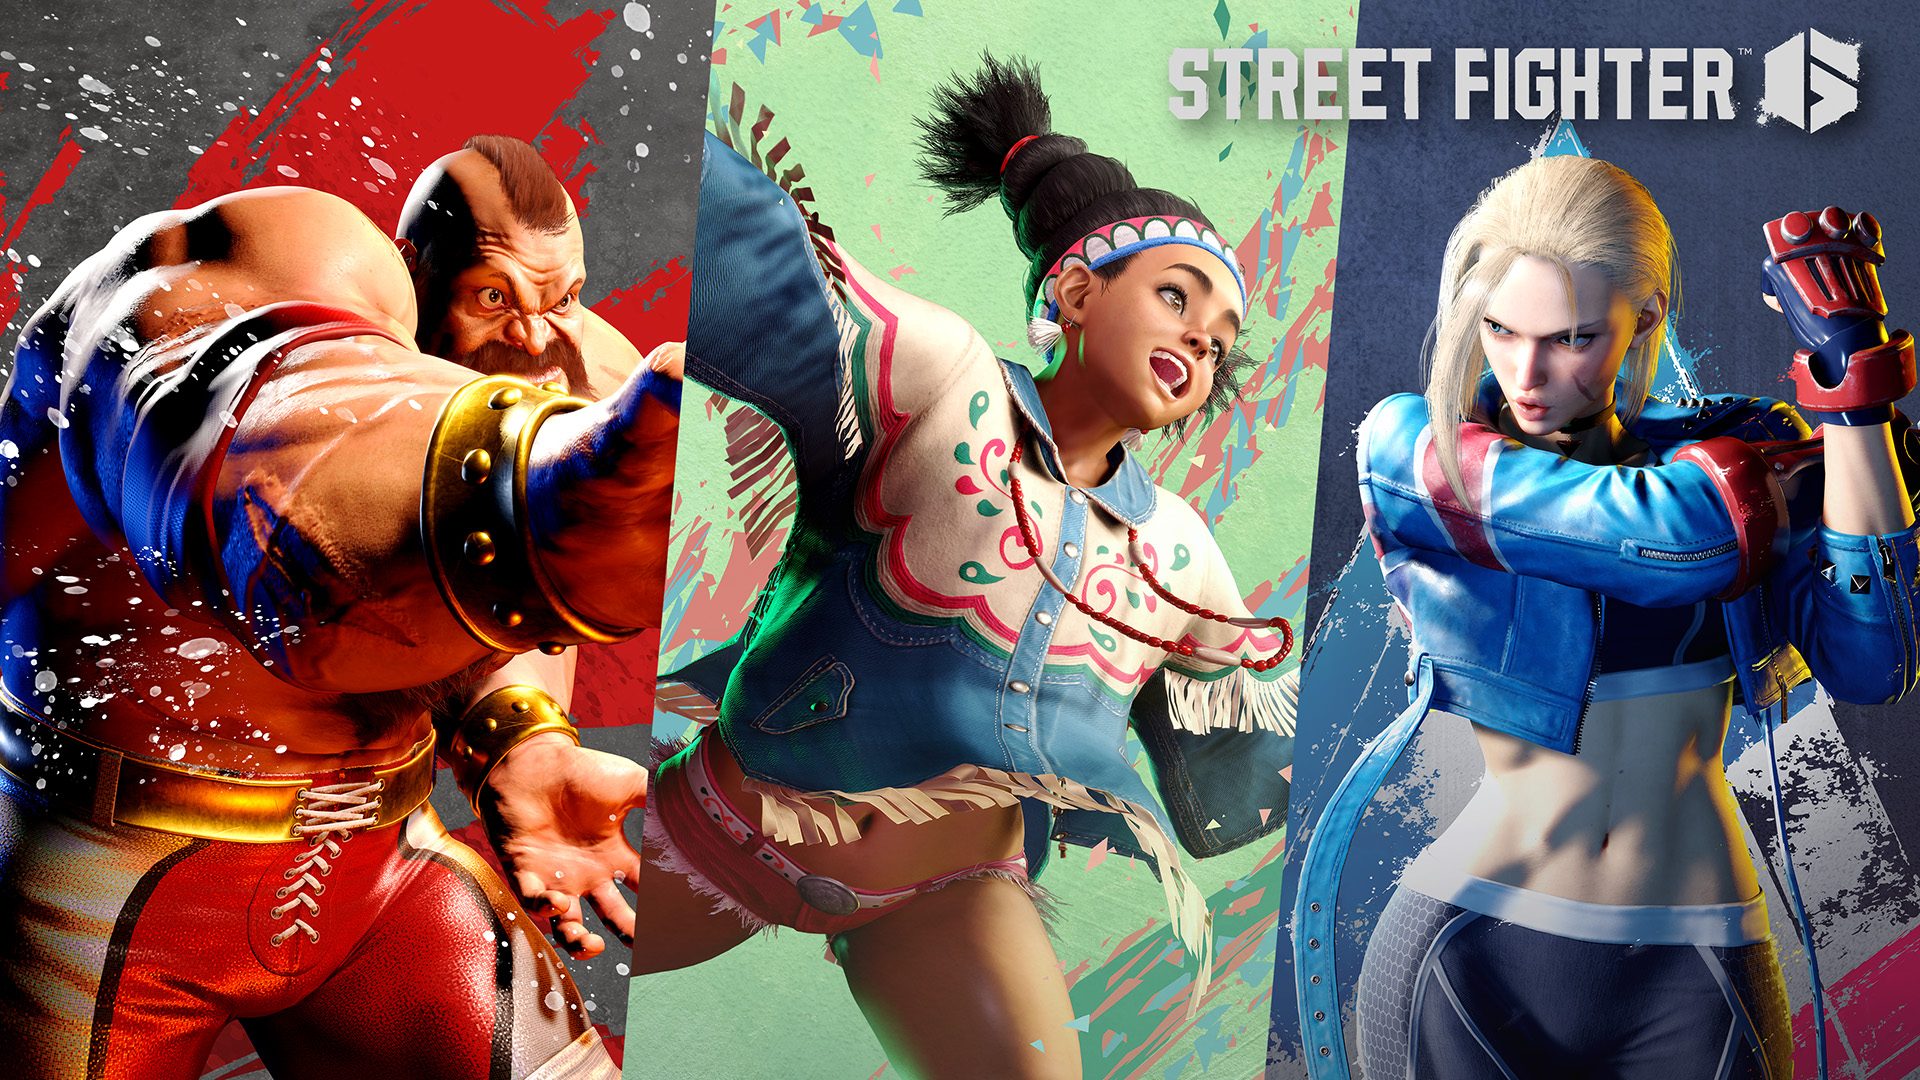 Cammy Street Fighter 6 Full Guide – Moves, Data, and Lore